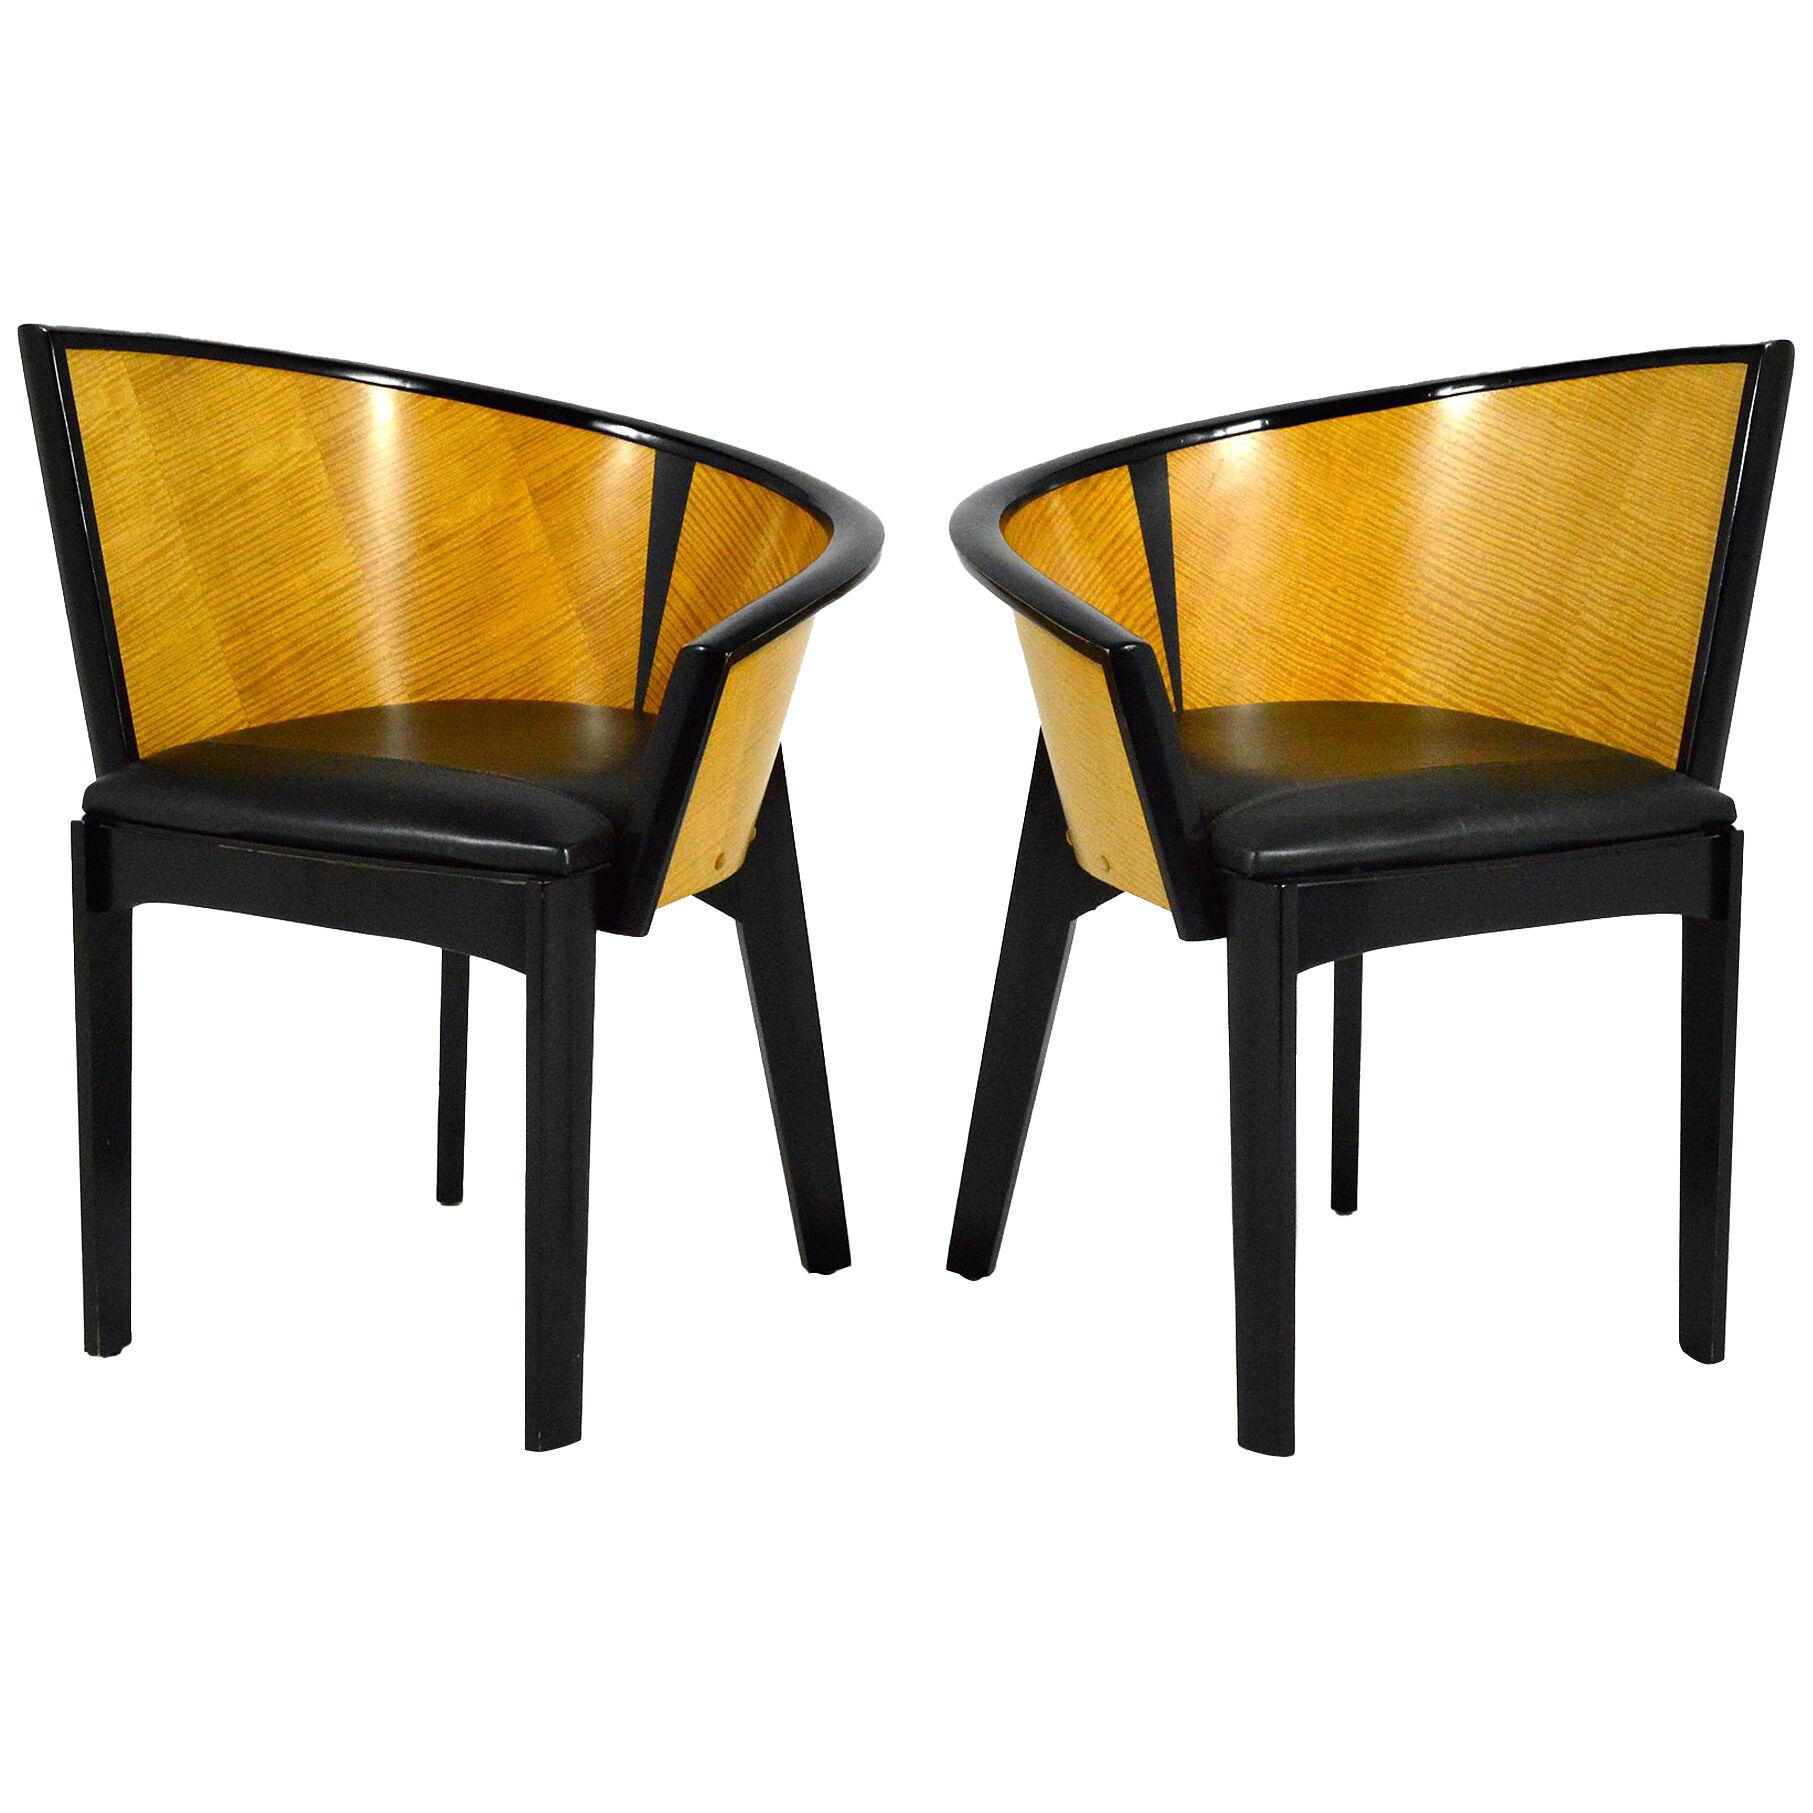 Paul Haigh Sinistra Chairs by Bernhardt